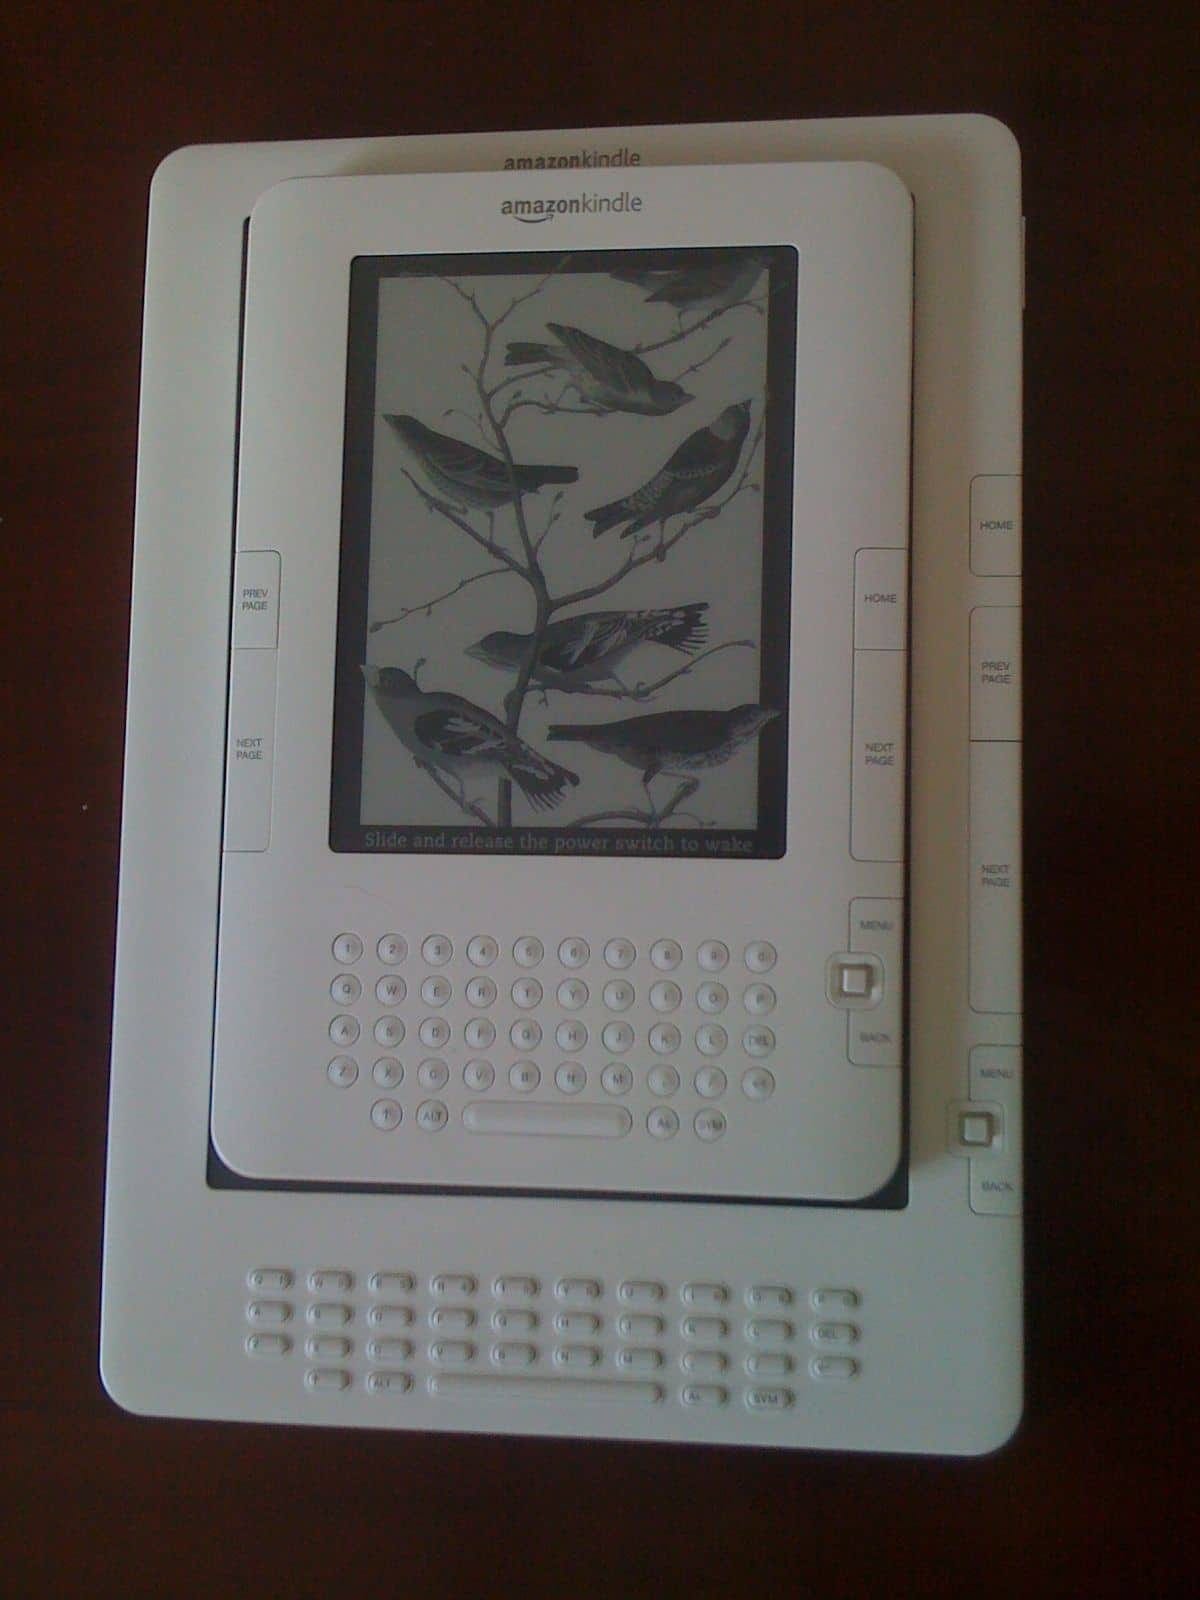 The Kindle DX with a Kindle 2 covering its screen